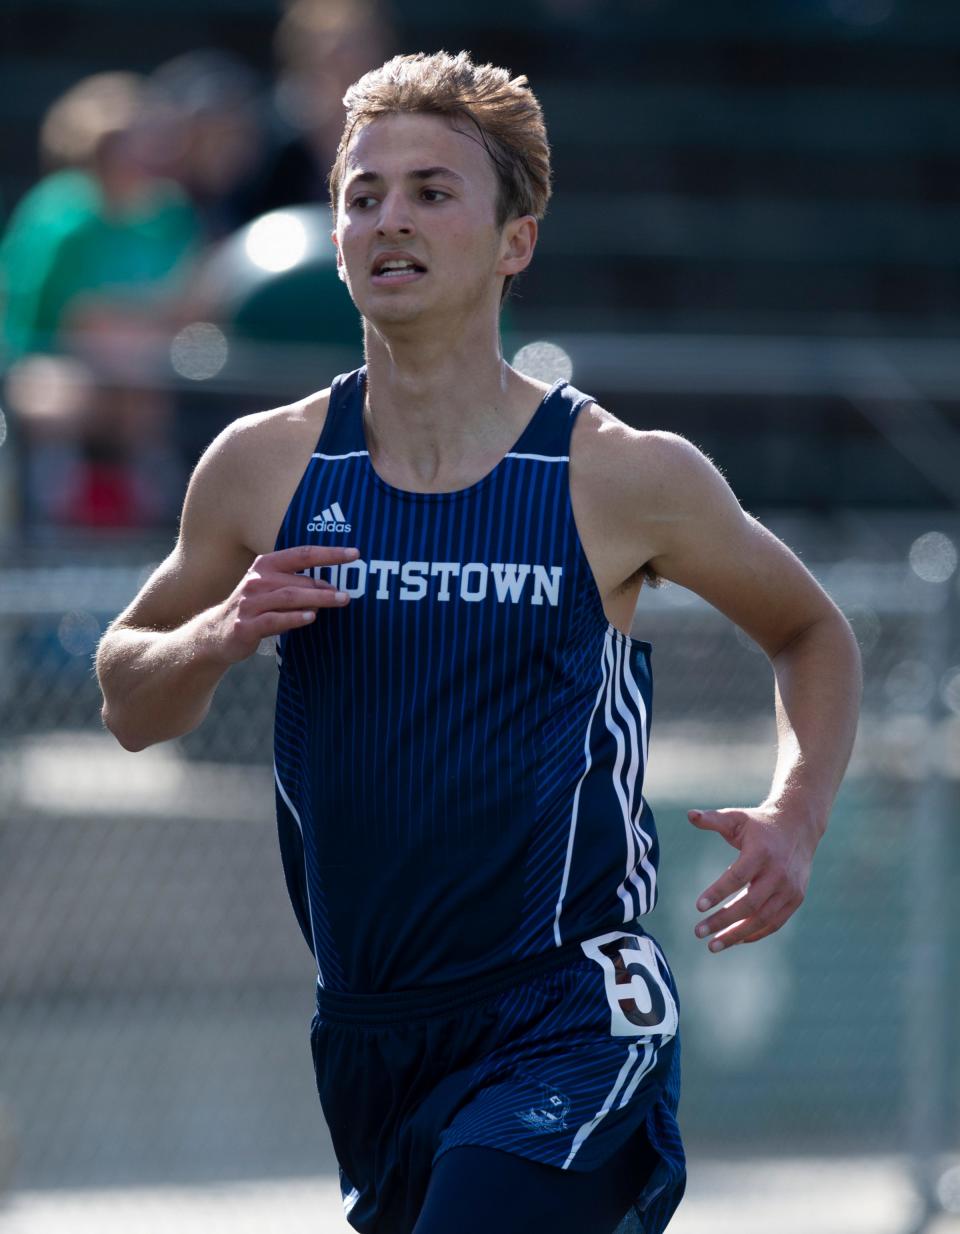 Rootstown junior Caleb Cutright captured titles in the 1600, pictured, and 3200 at the 2022 Portage Trail Conference Championships.